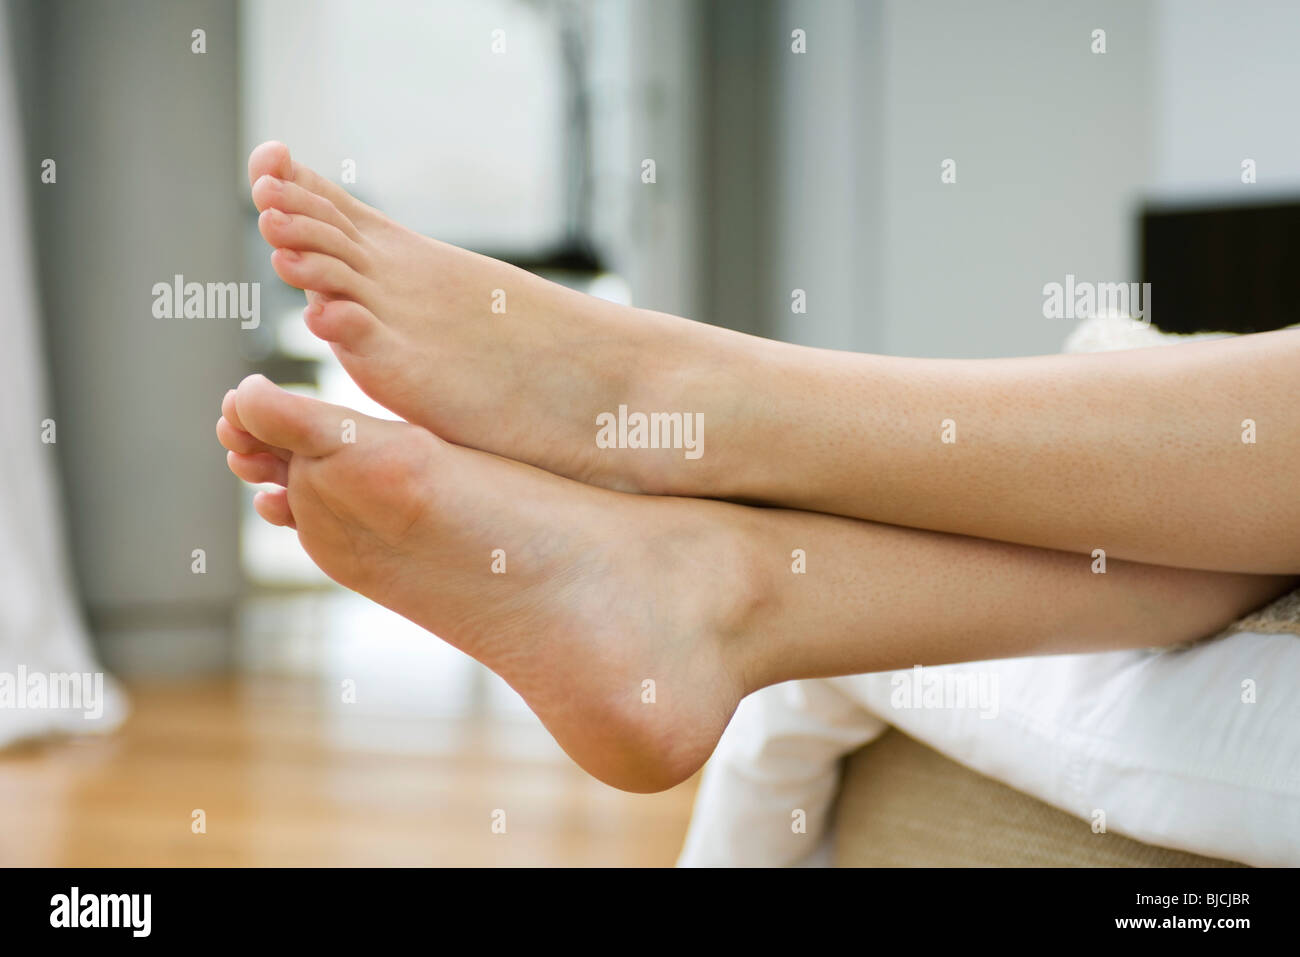 Woman's bare feet, legs crossed at ankle Stock Photo